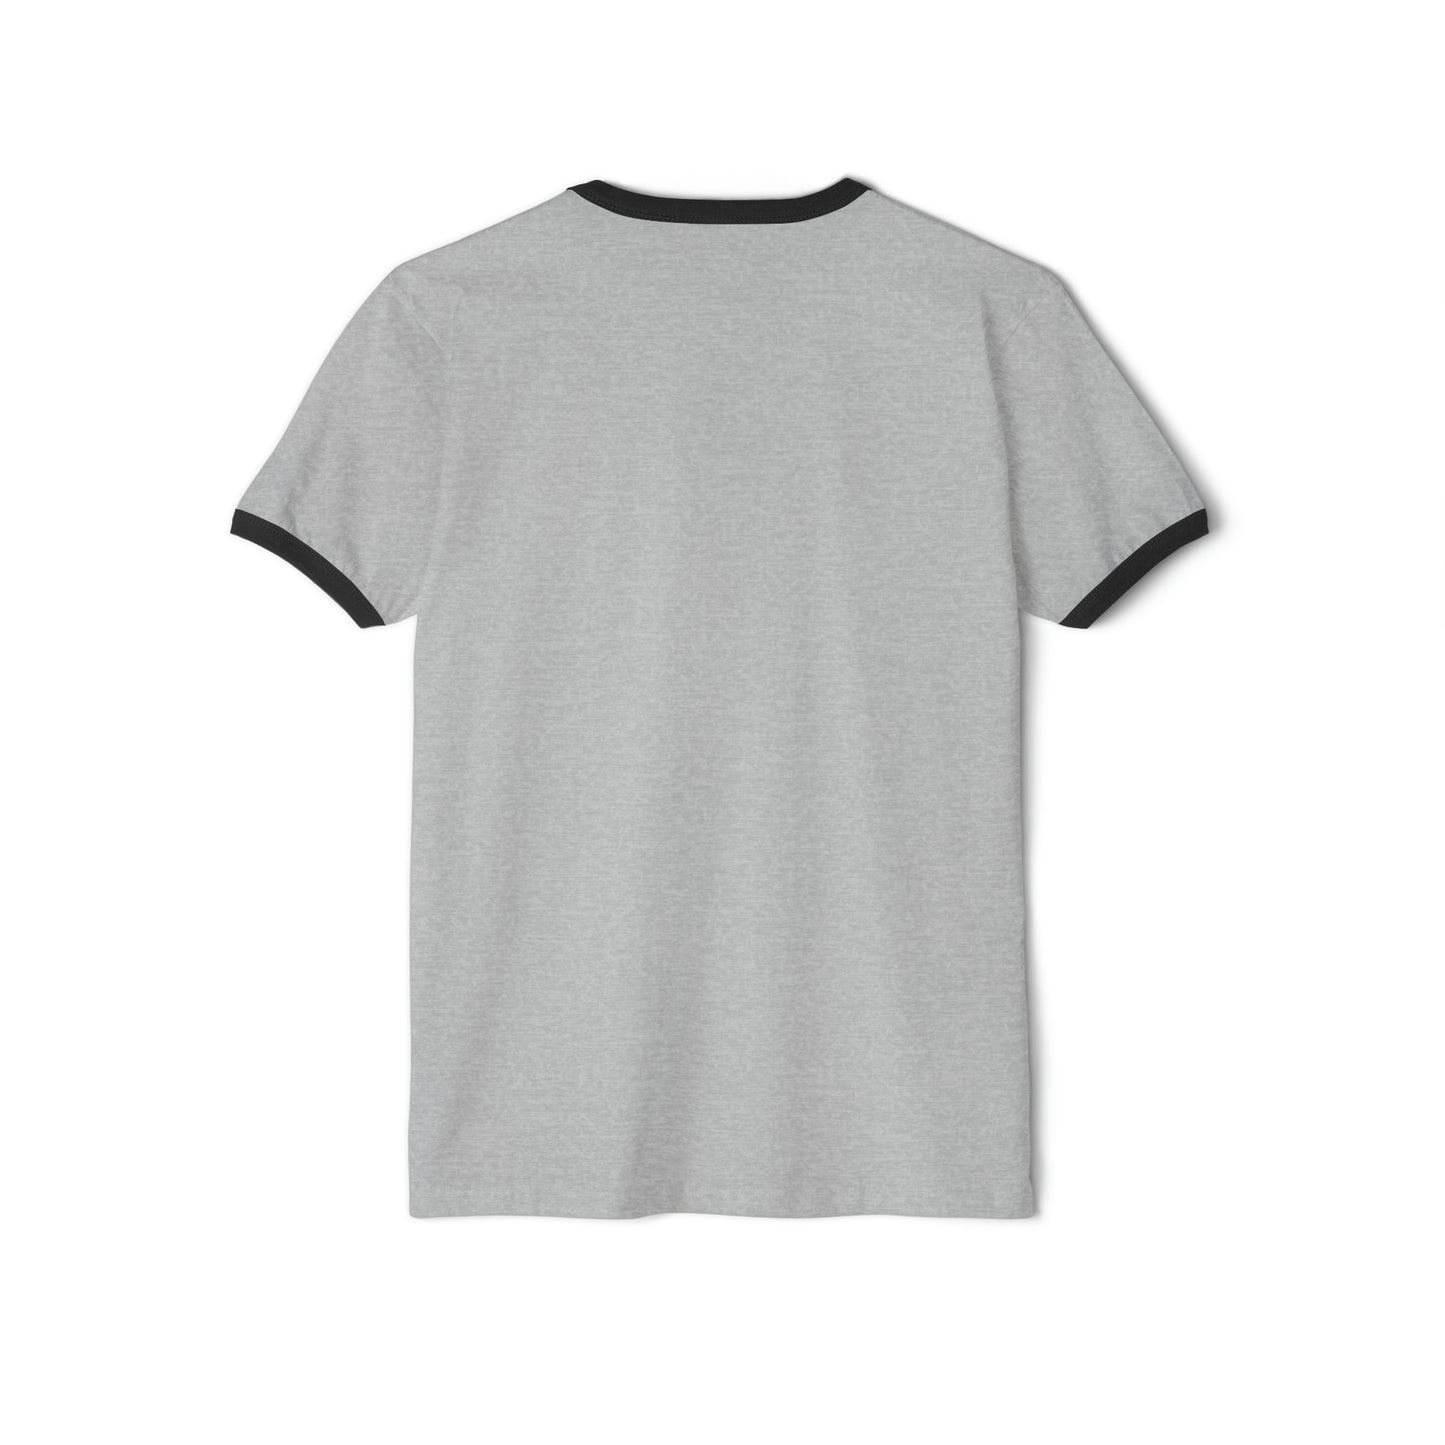 Addicted Social Club | Women's Cotton Ringer T-Shirt | Classic Fit